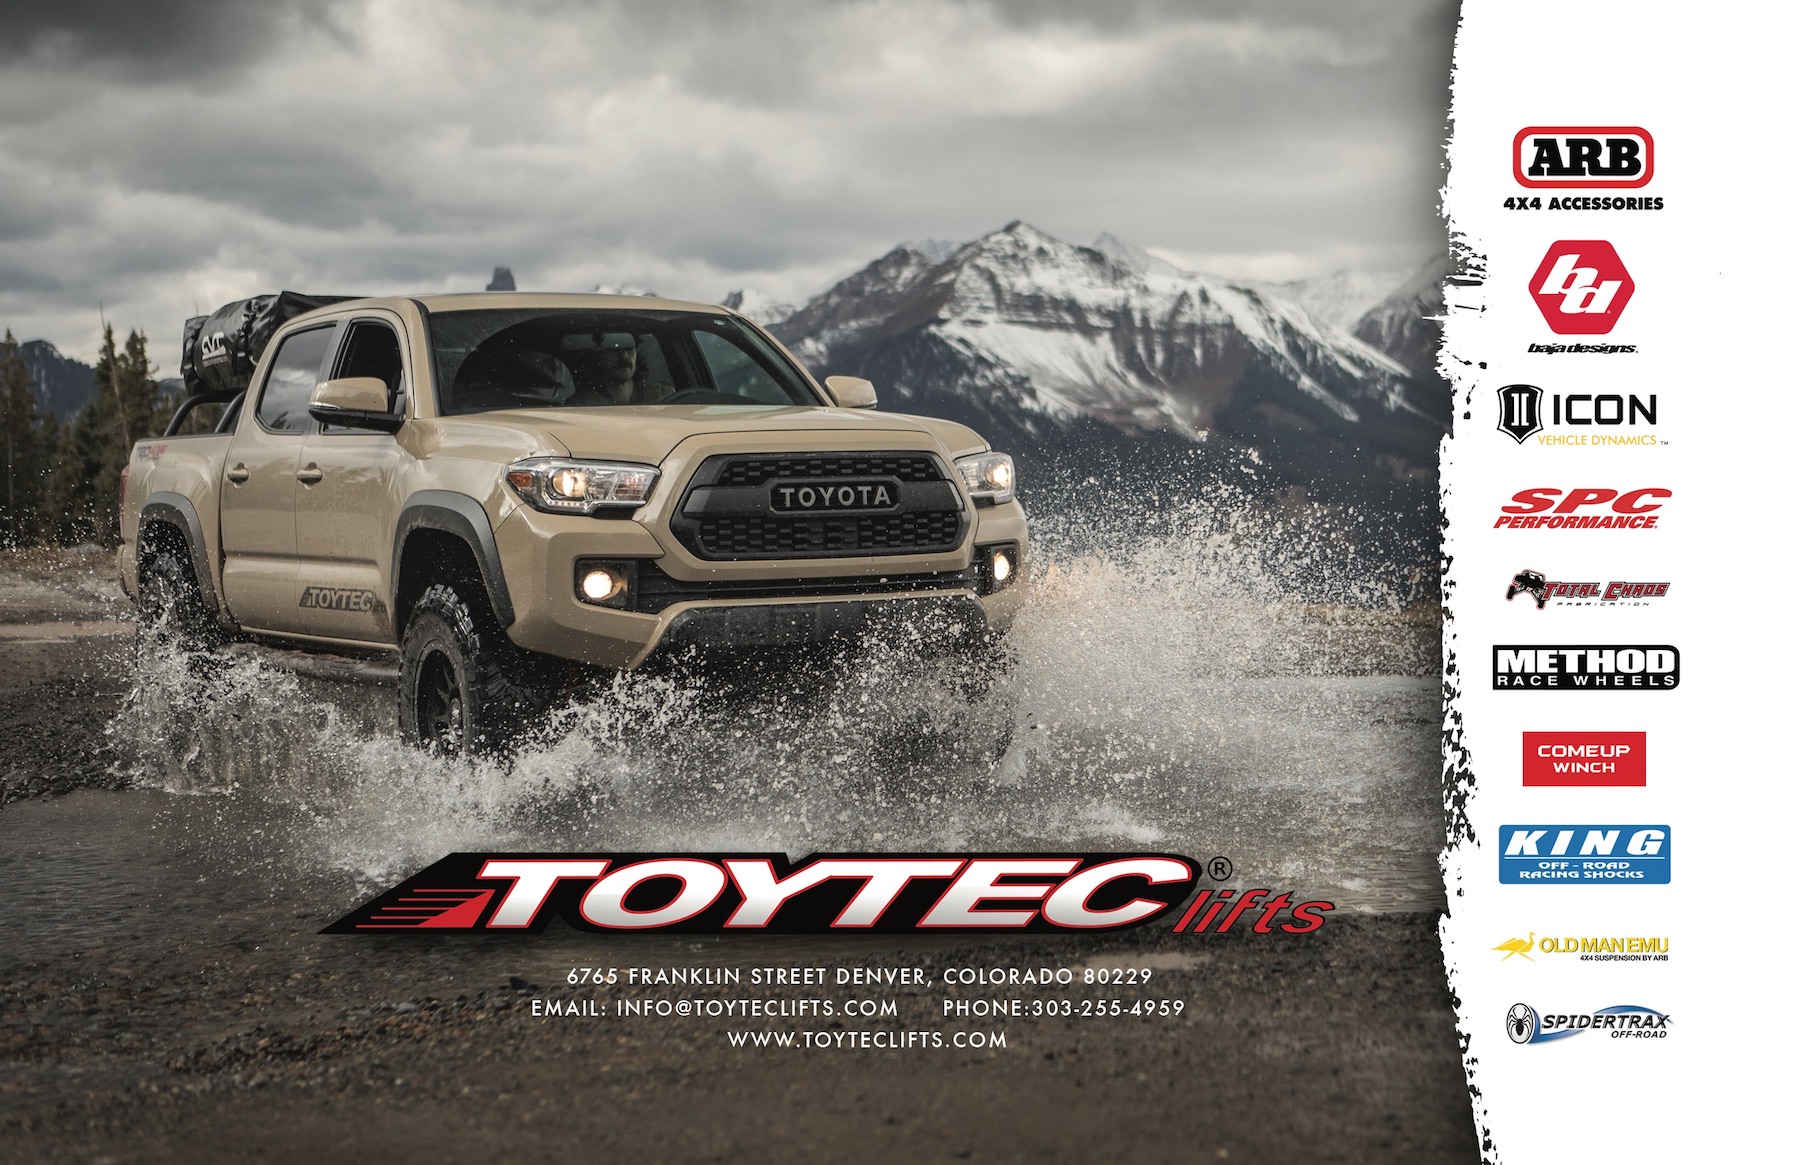 Toytec Lifts Off Road 4x4 Toyota Overland